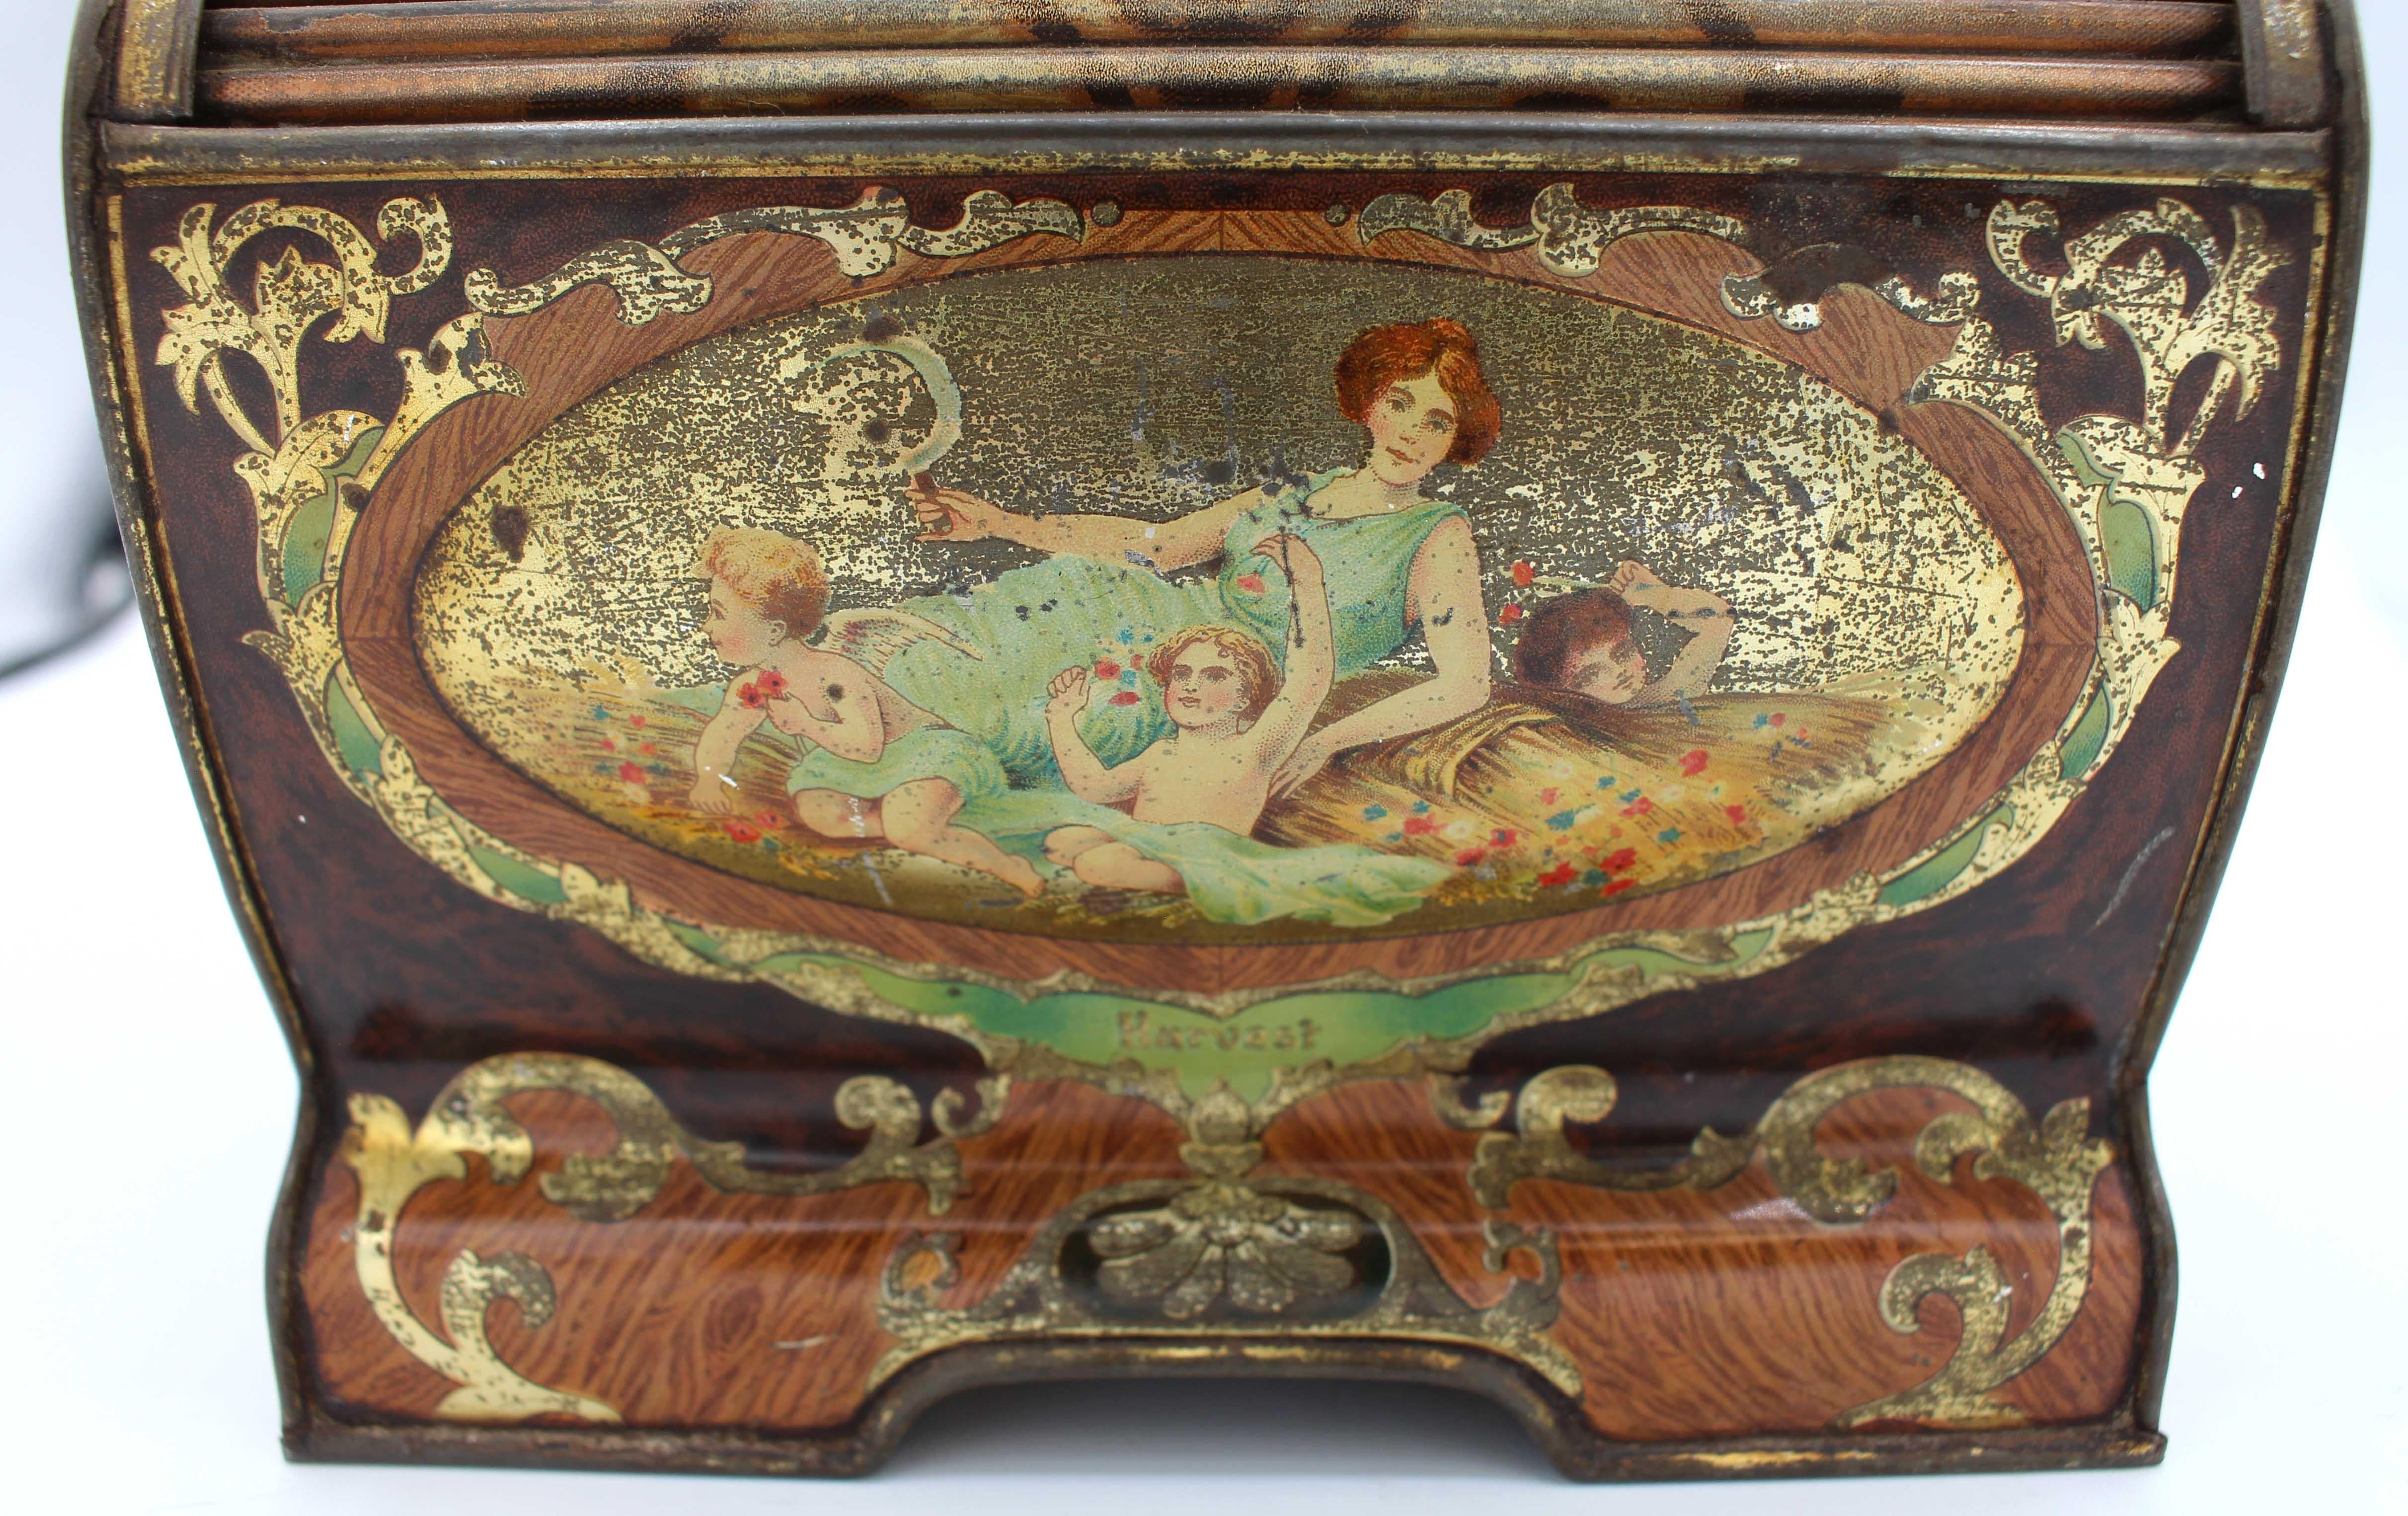 Fame 1906 Art Nouveau waterfall form biscuit tin box by Huntley & Palmers, English. Each side decorated with Greco-Roman figural reserves of 